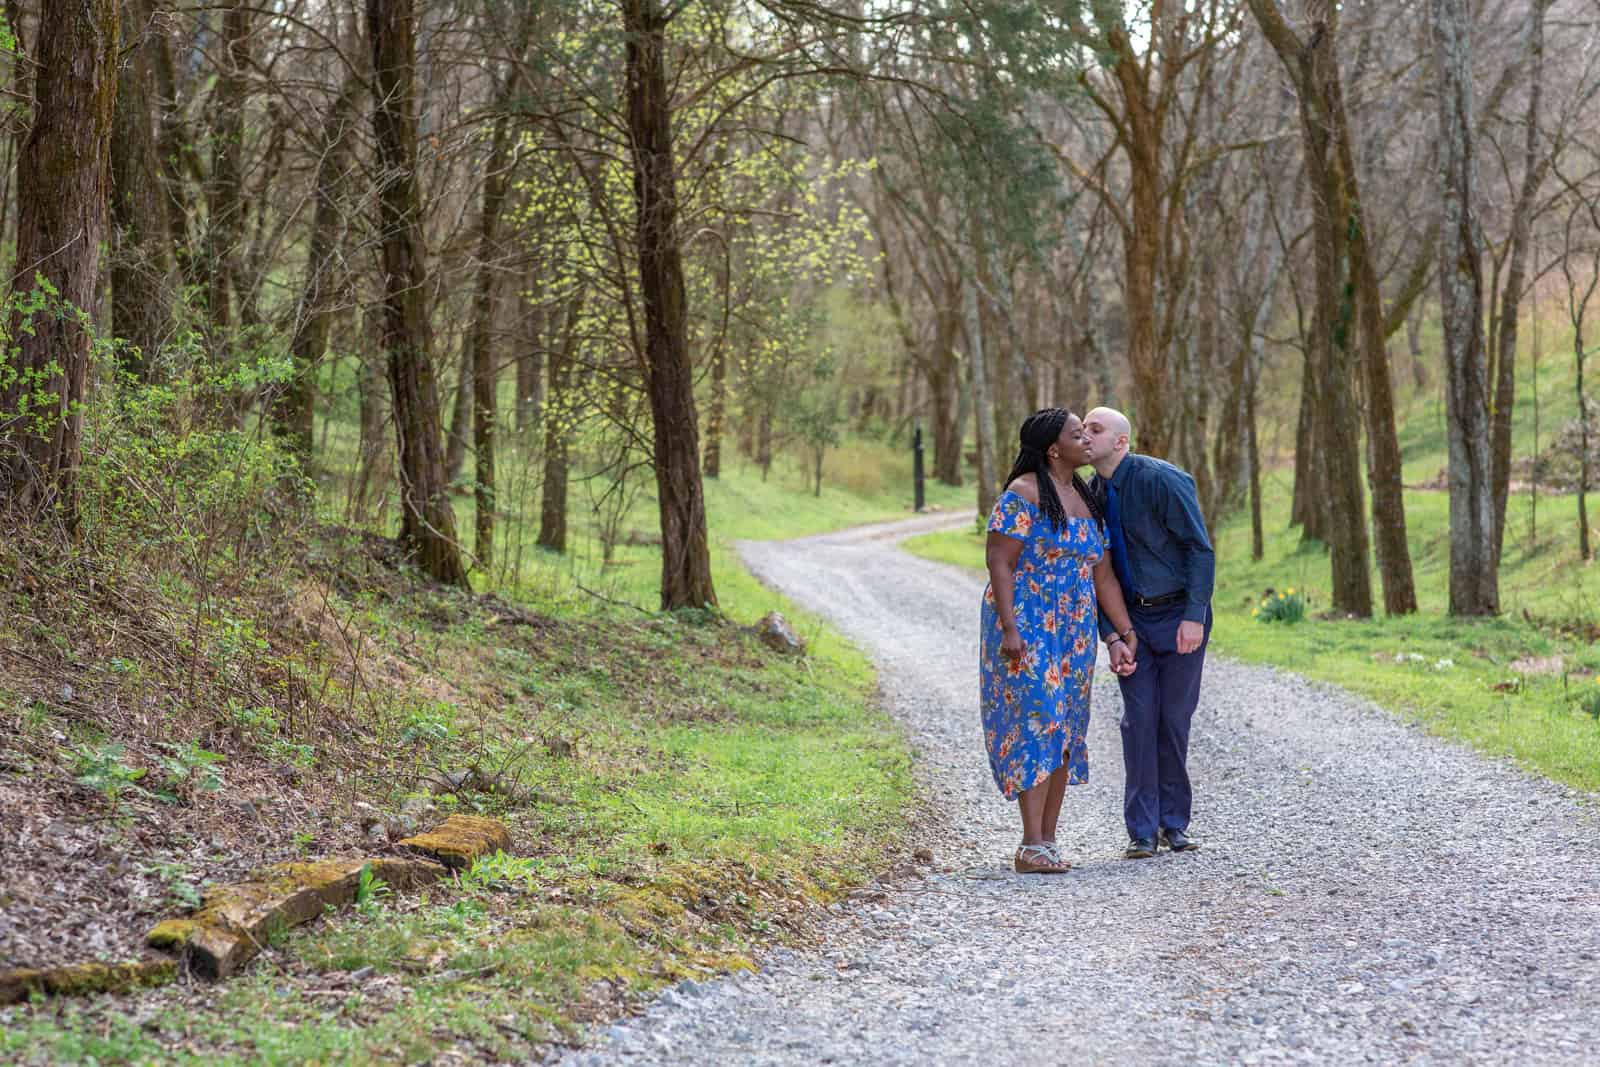 Spring Nashville Elopement at Butterfly Hollow; bride and groom walk down winding gravel drive with woods all around